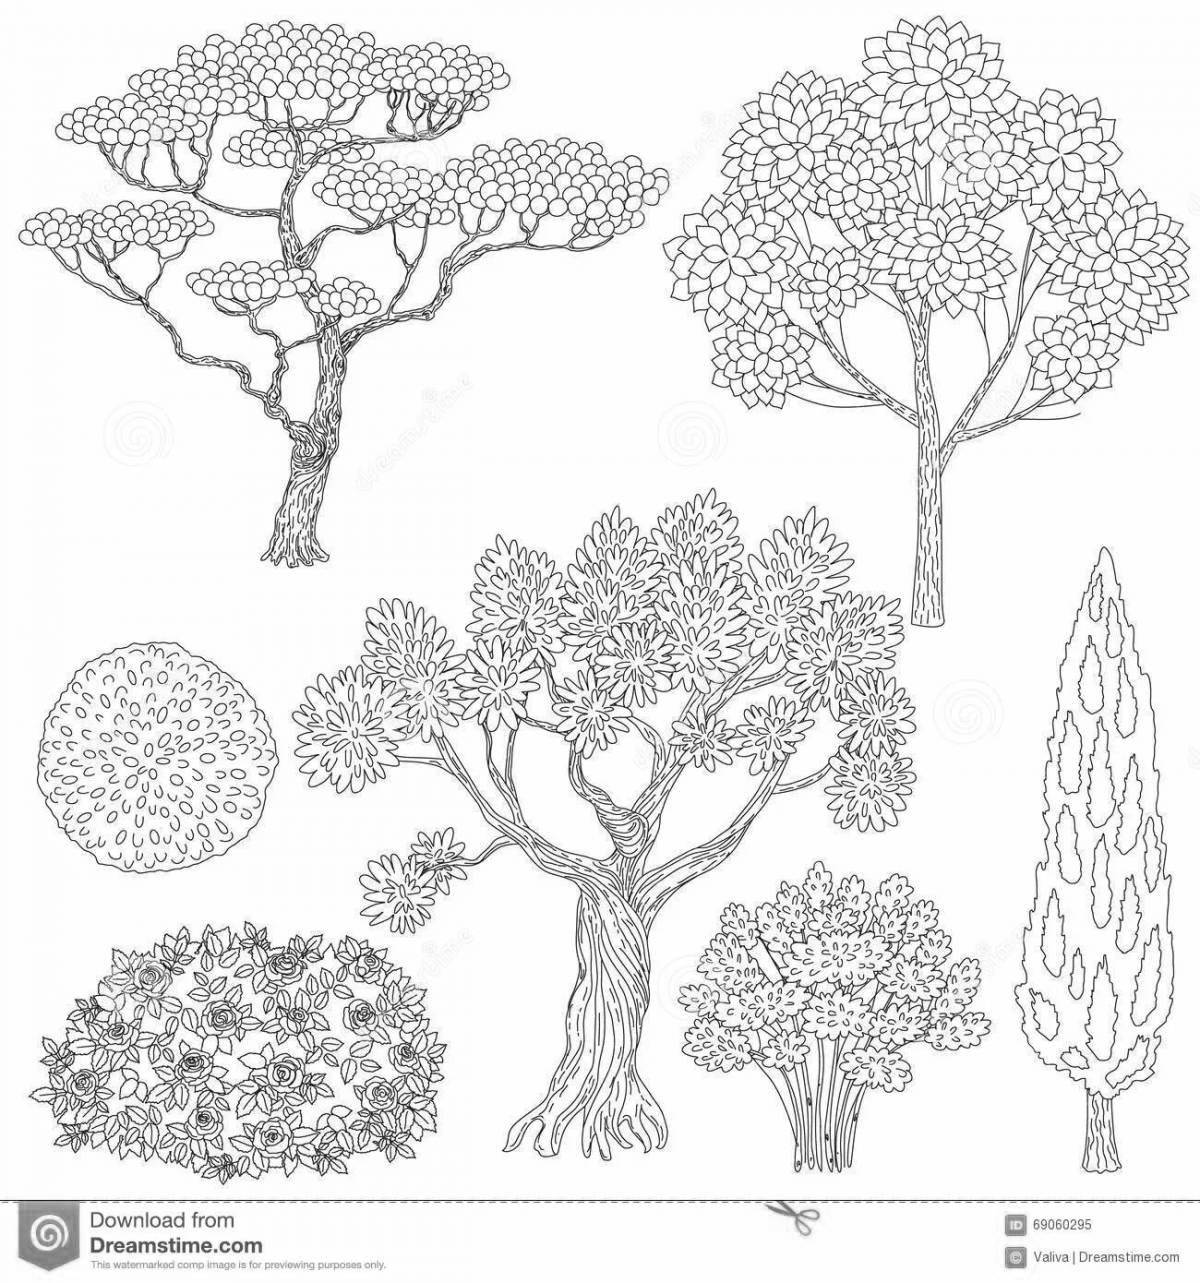 Gorgeous bush coloring book for kids